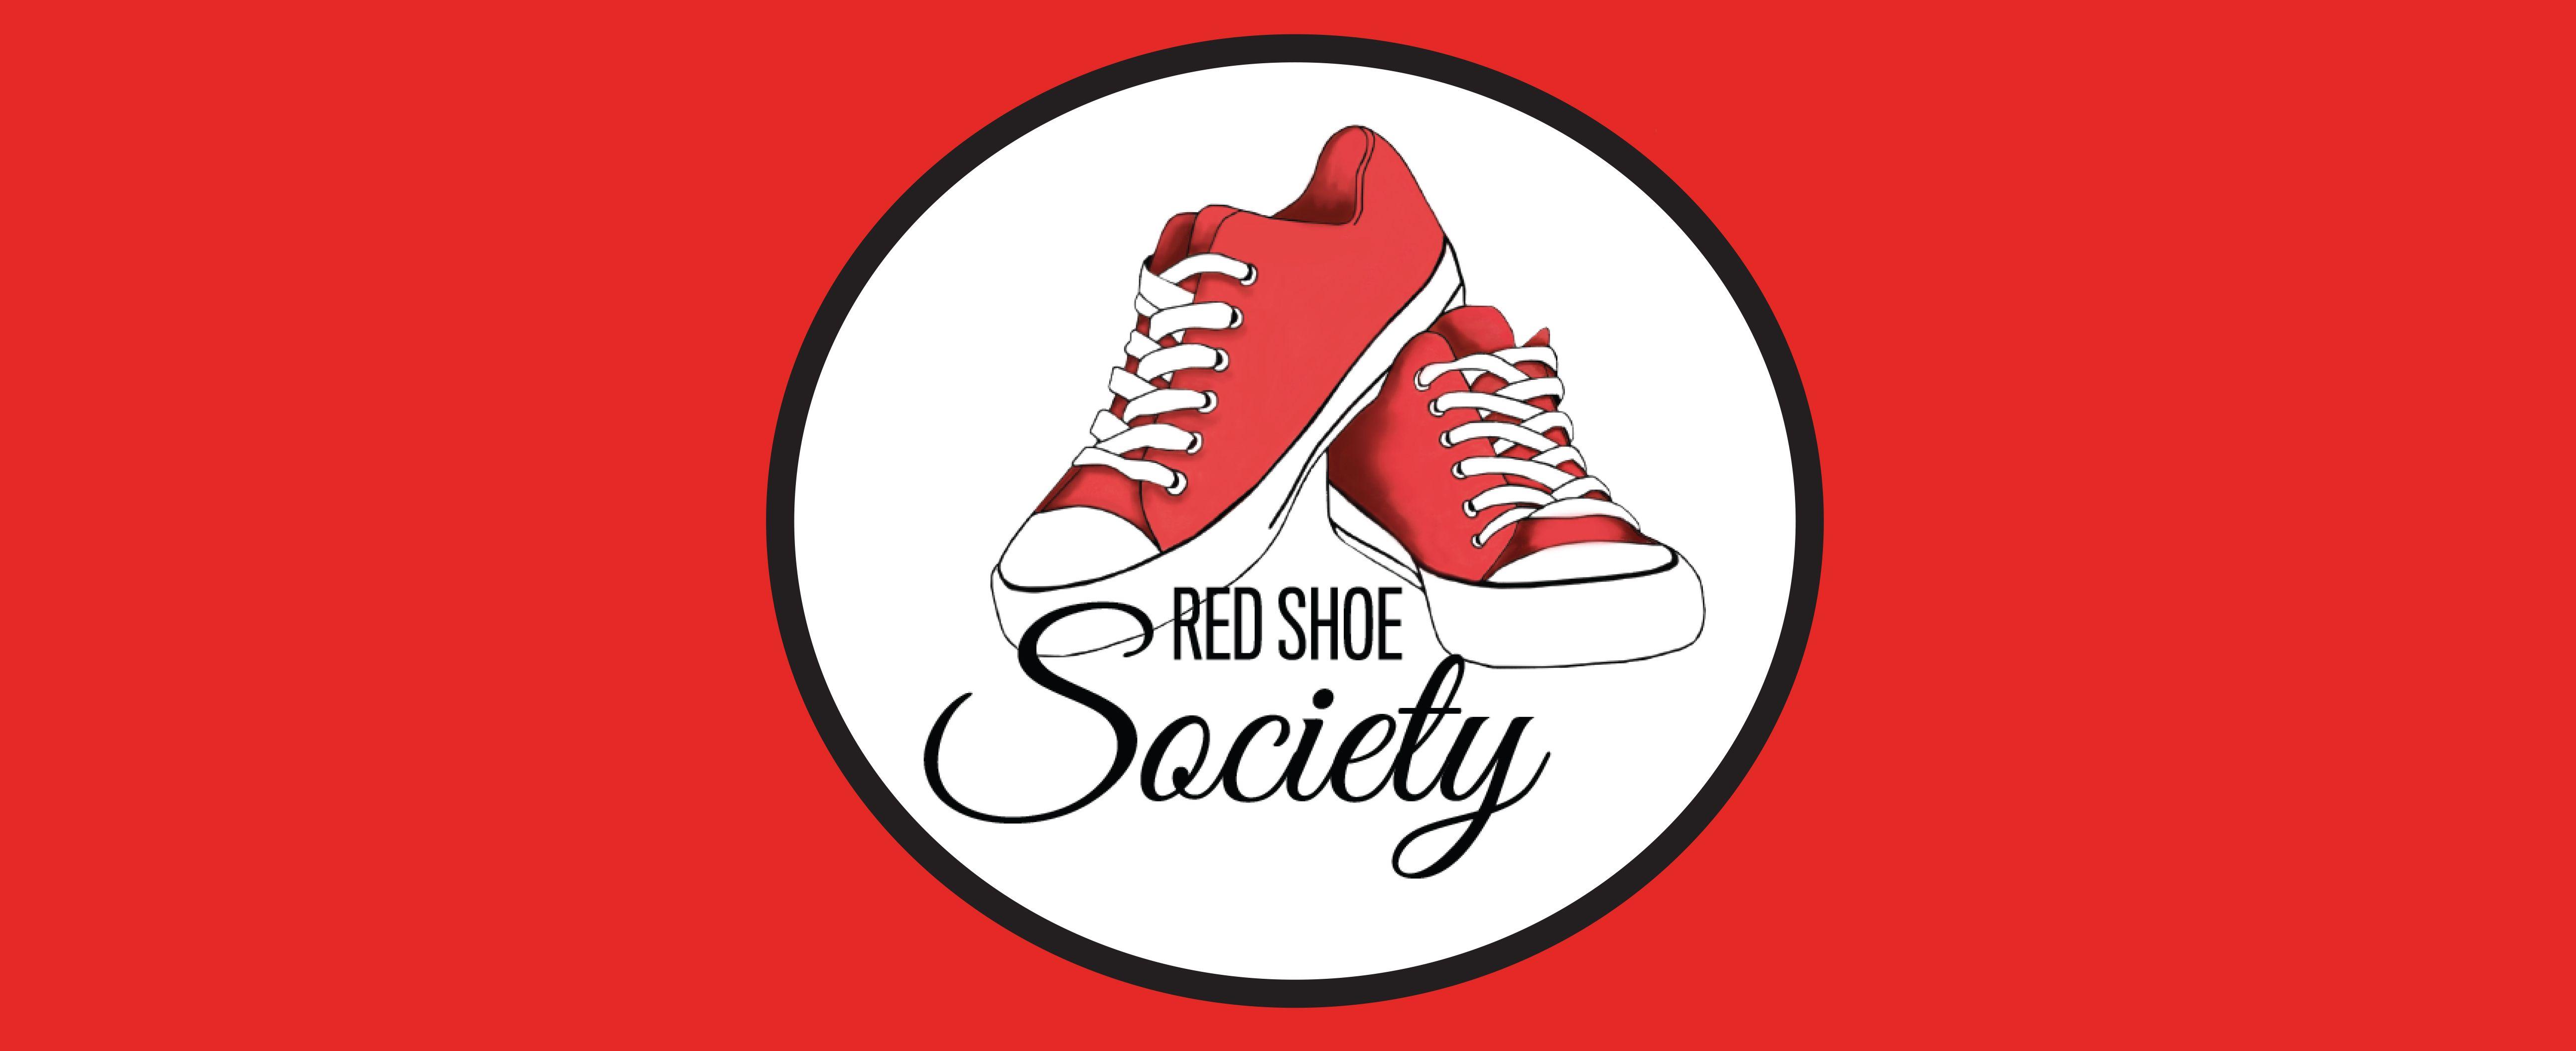 Shoe Red Logo - Red Shoe Society – Ronald McDonald House Mobile